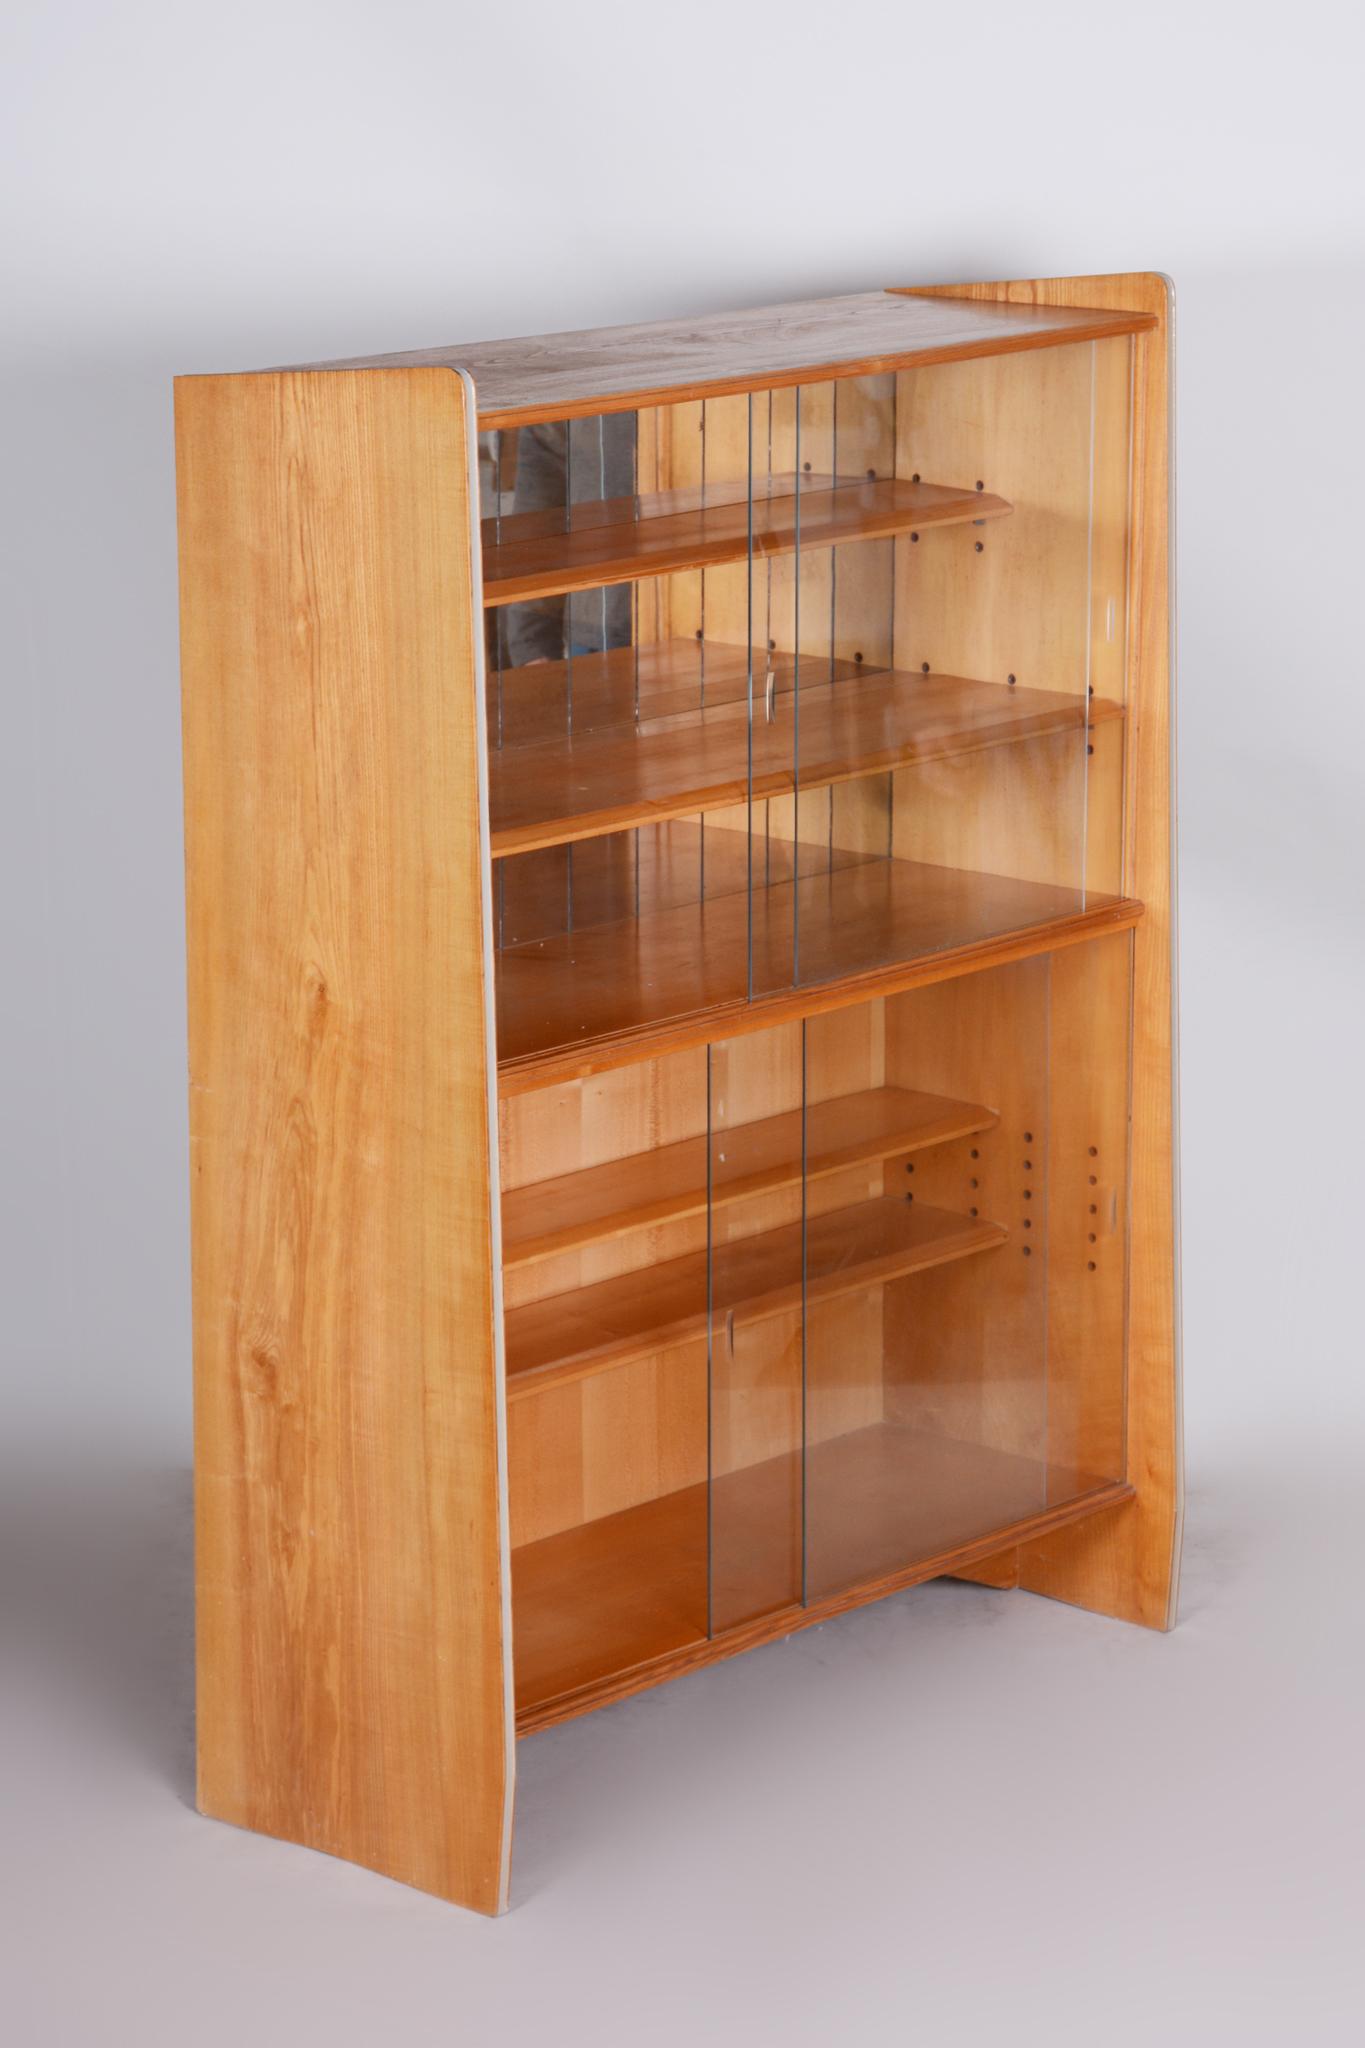 20th Century Unique Czech Ash Mid-Century Bookcase, 1950s, Well Preserved Condition For Sale